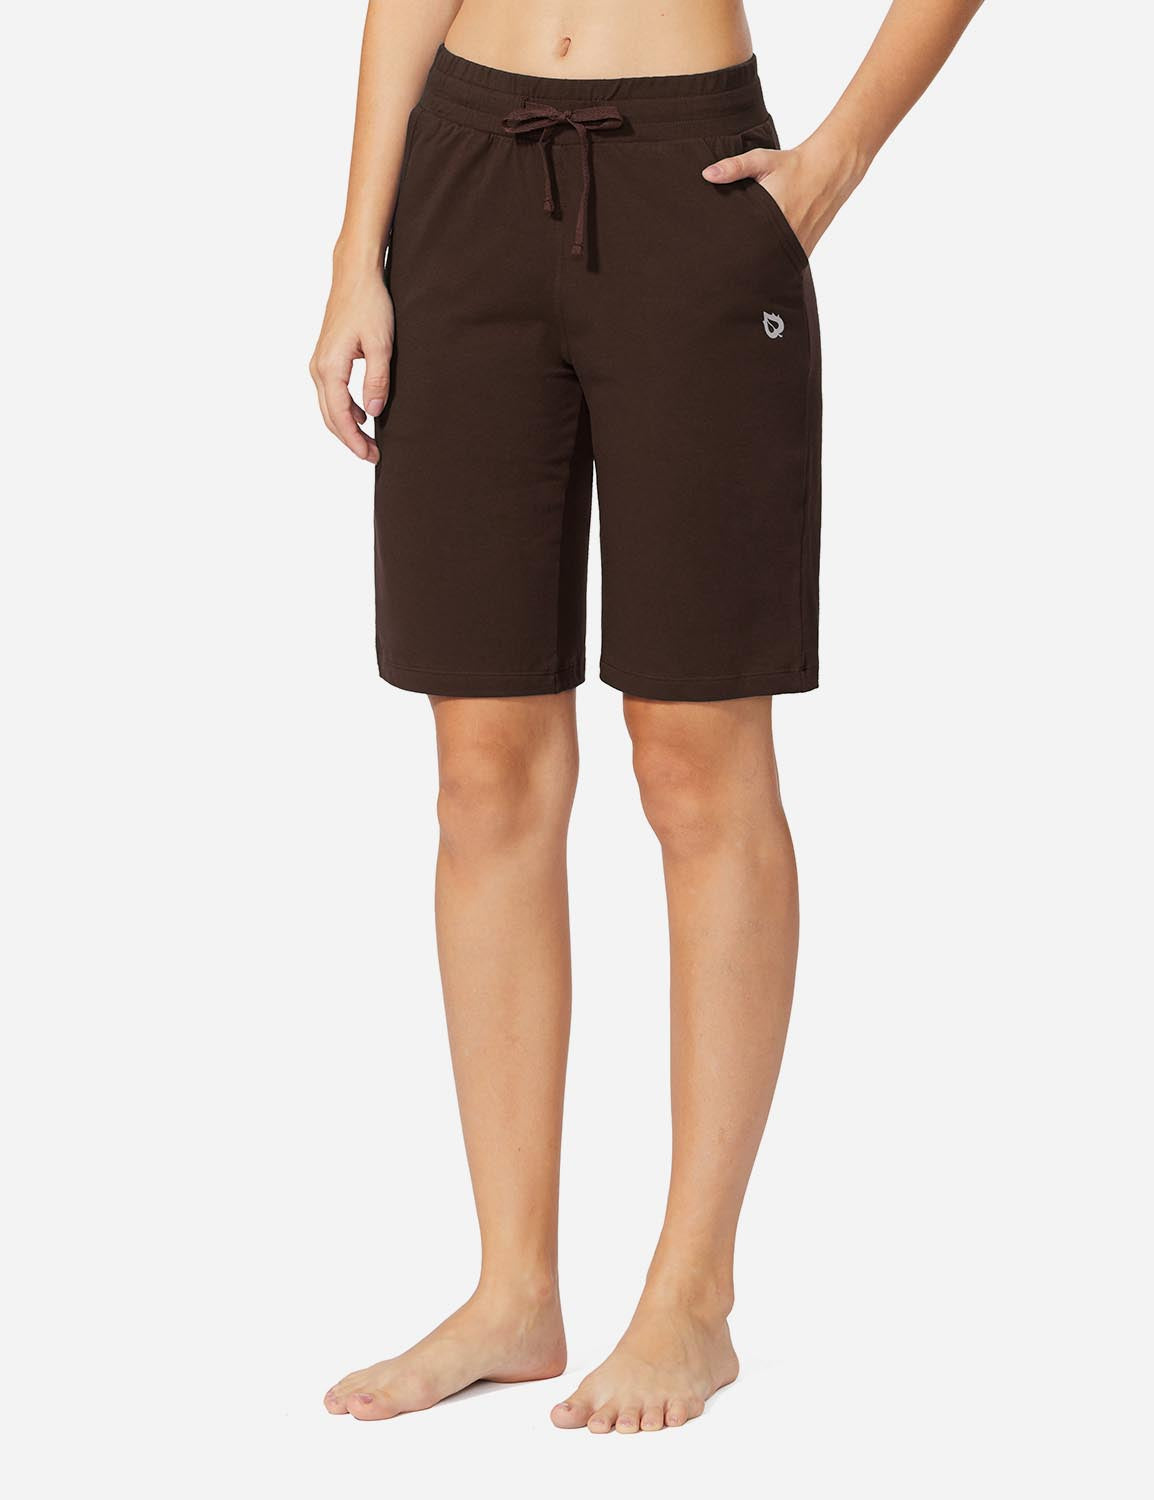 Baleaf Women's Mid-Rise Cotton Pocketed Bermuda Shorts abh104 Coffee Front